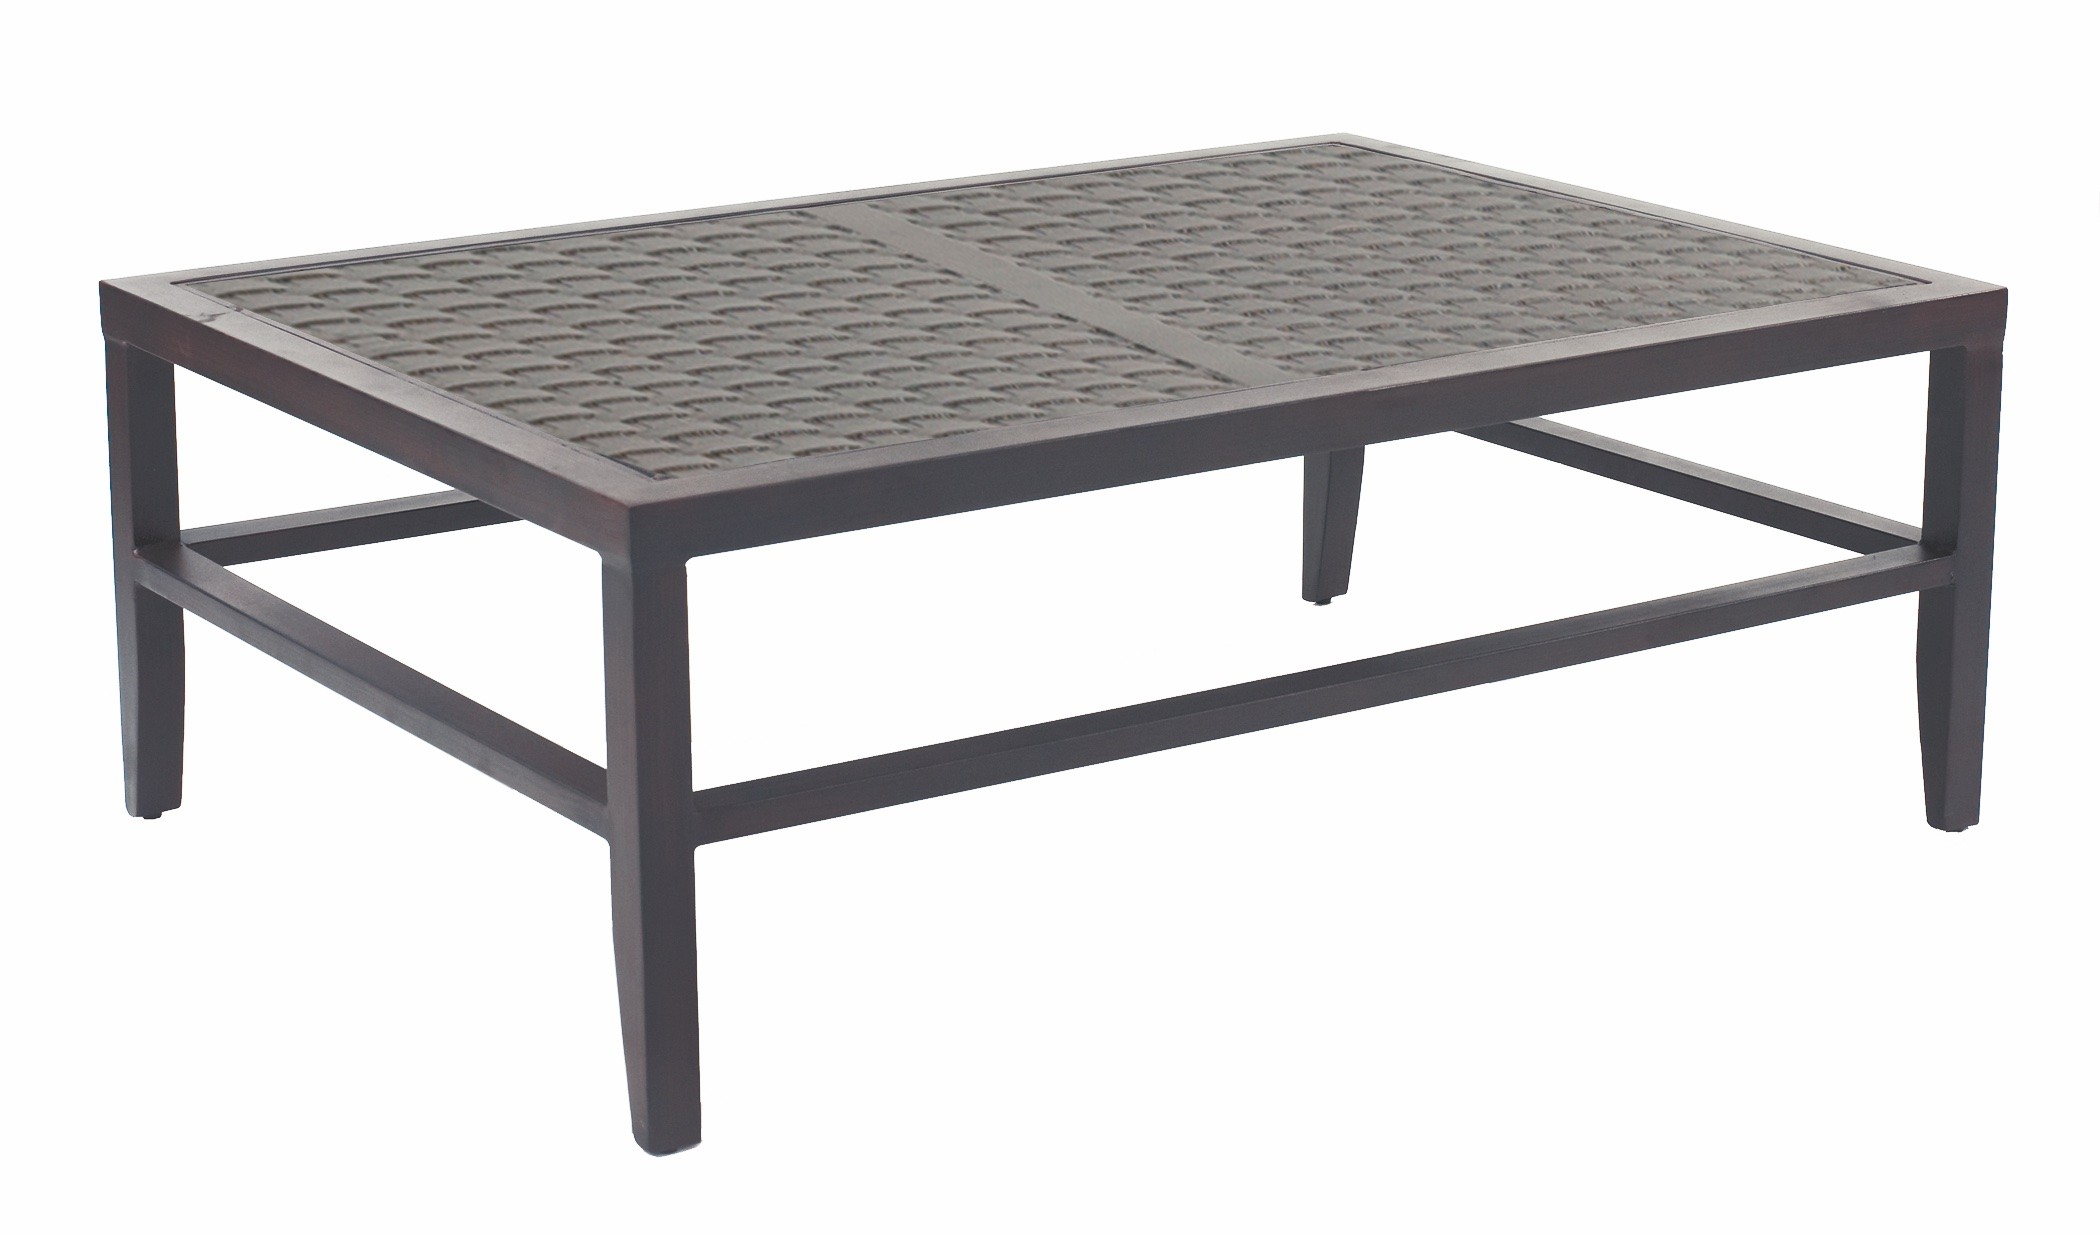 CLASSICAL RECT COFFEE TABLE
SRC3248
SPEC SHEET
